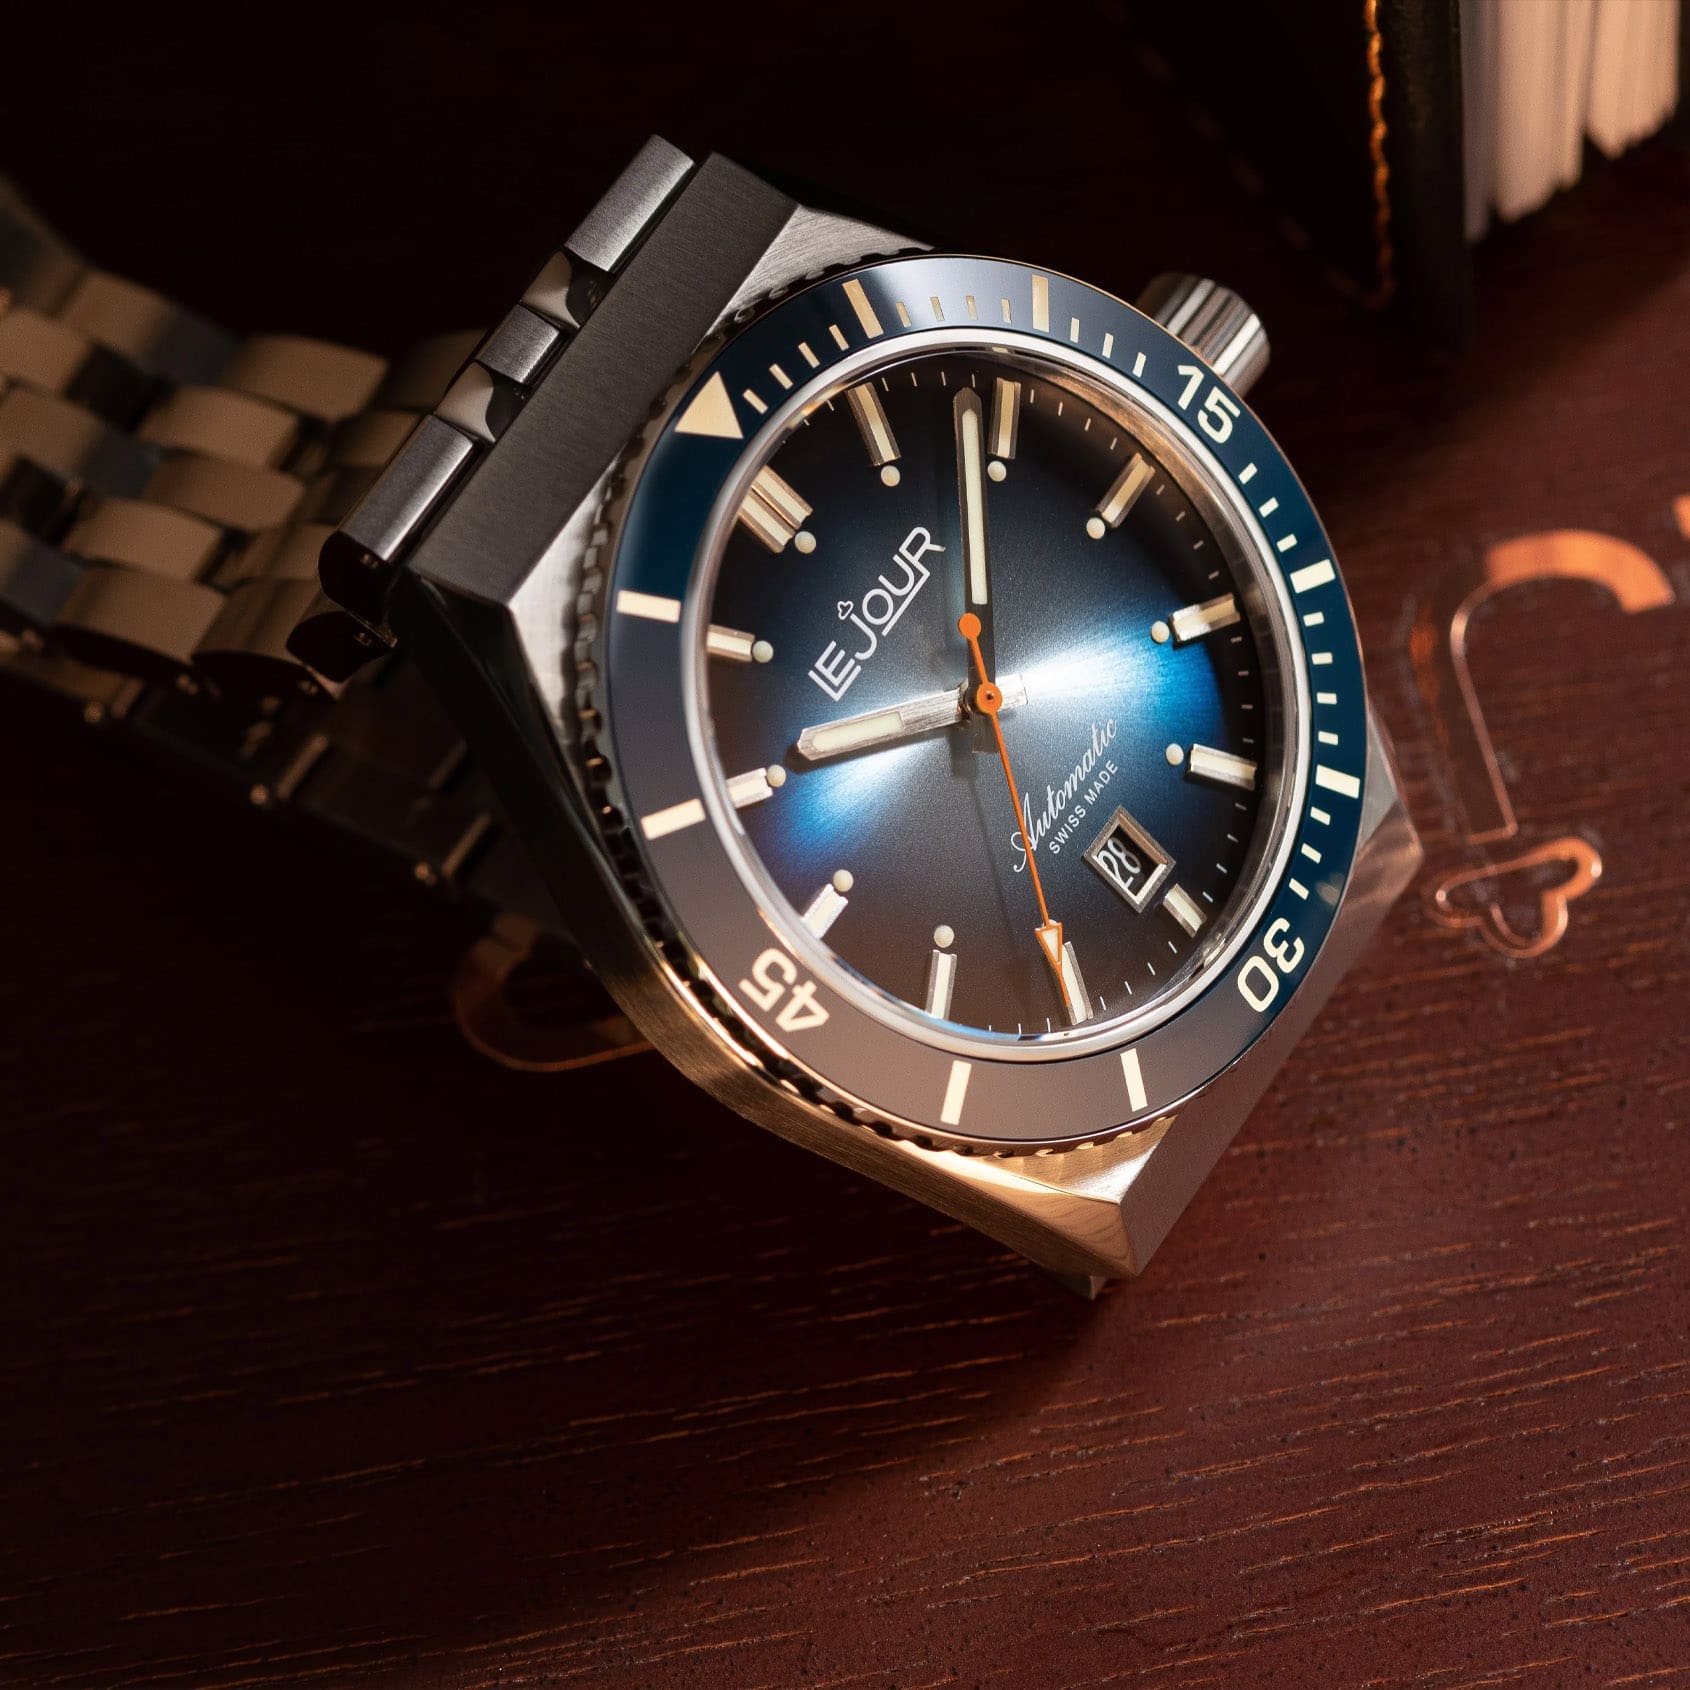 MICRO MONDAYS: The Le Jour Delmare delivers a 1970s-inspired dive watch for a great price